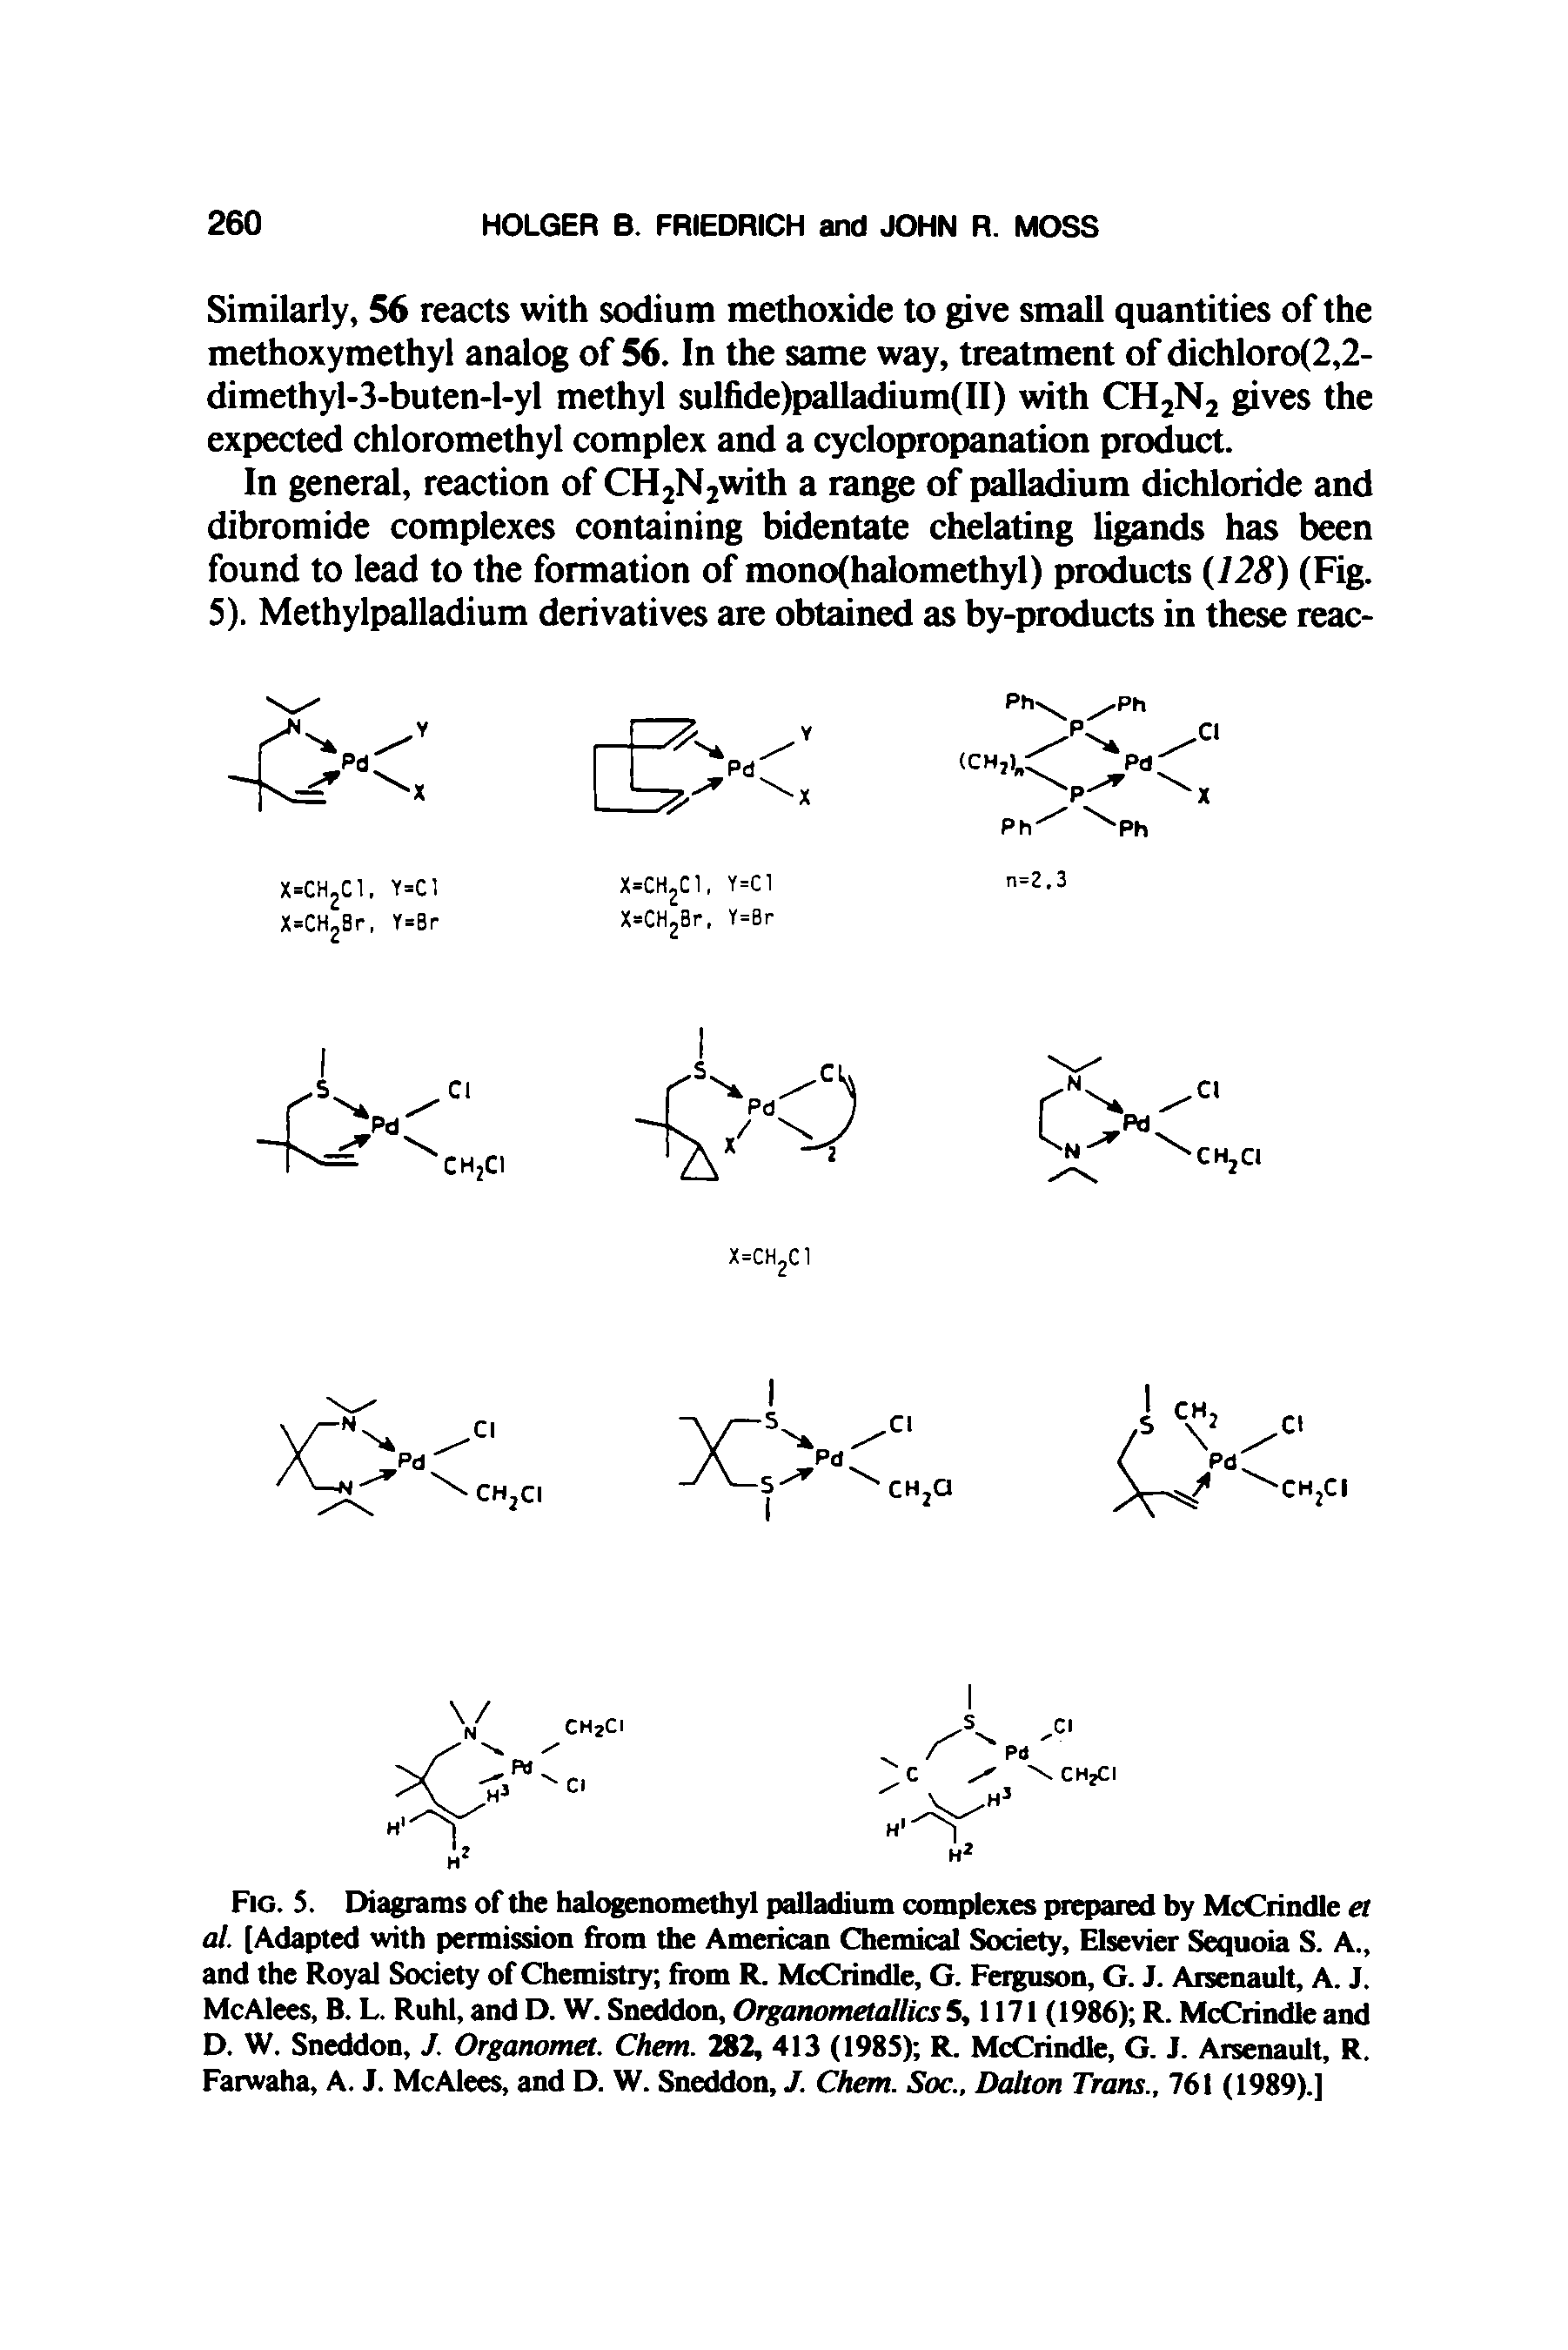 Fig. S. Diagrams of the halogenomethyl palladium complexes prepared by McCrindle el al. [Adapted with permission from the American Chemical Society, Elsevier Sequoia S. A., and the Royal Society of Chemistry from R. McCrindle, G. Ferguson, G. J. Arsenault, A. J. McAlees, B. L. Ruhl, and D. W. Sneddon, Organometallics 5,1171 (1986) R. McCrindle and D. W. Sneddon, J. Organomet. Chem. 282, 413 (1985) R. McCrindle, G. J. Arsenault, R. Farwaha, A. J. McAlees, and D. W. Sneddon, J. Chem. Soc., Dalton Trans., 761 (1989).]...